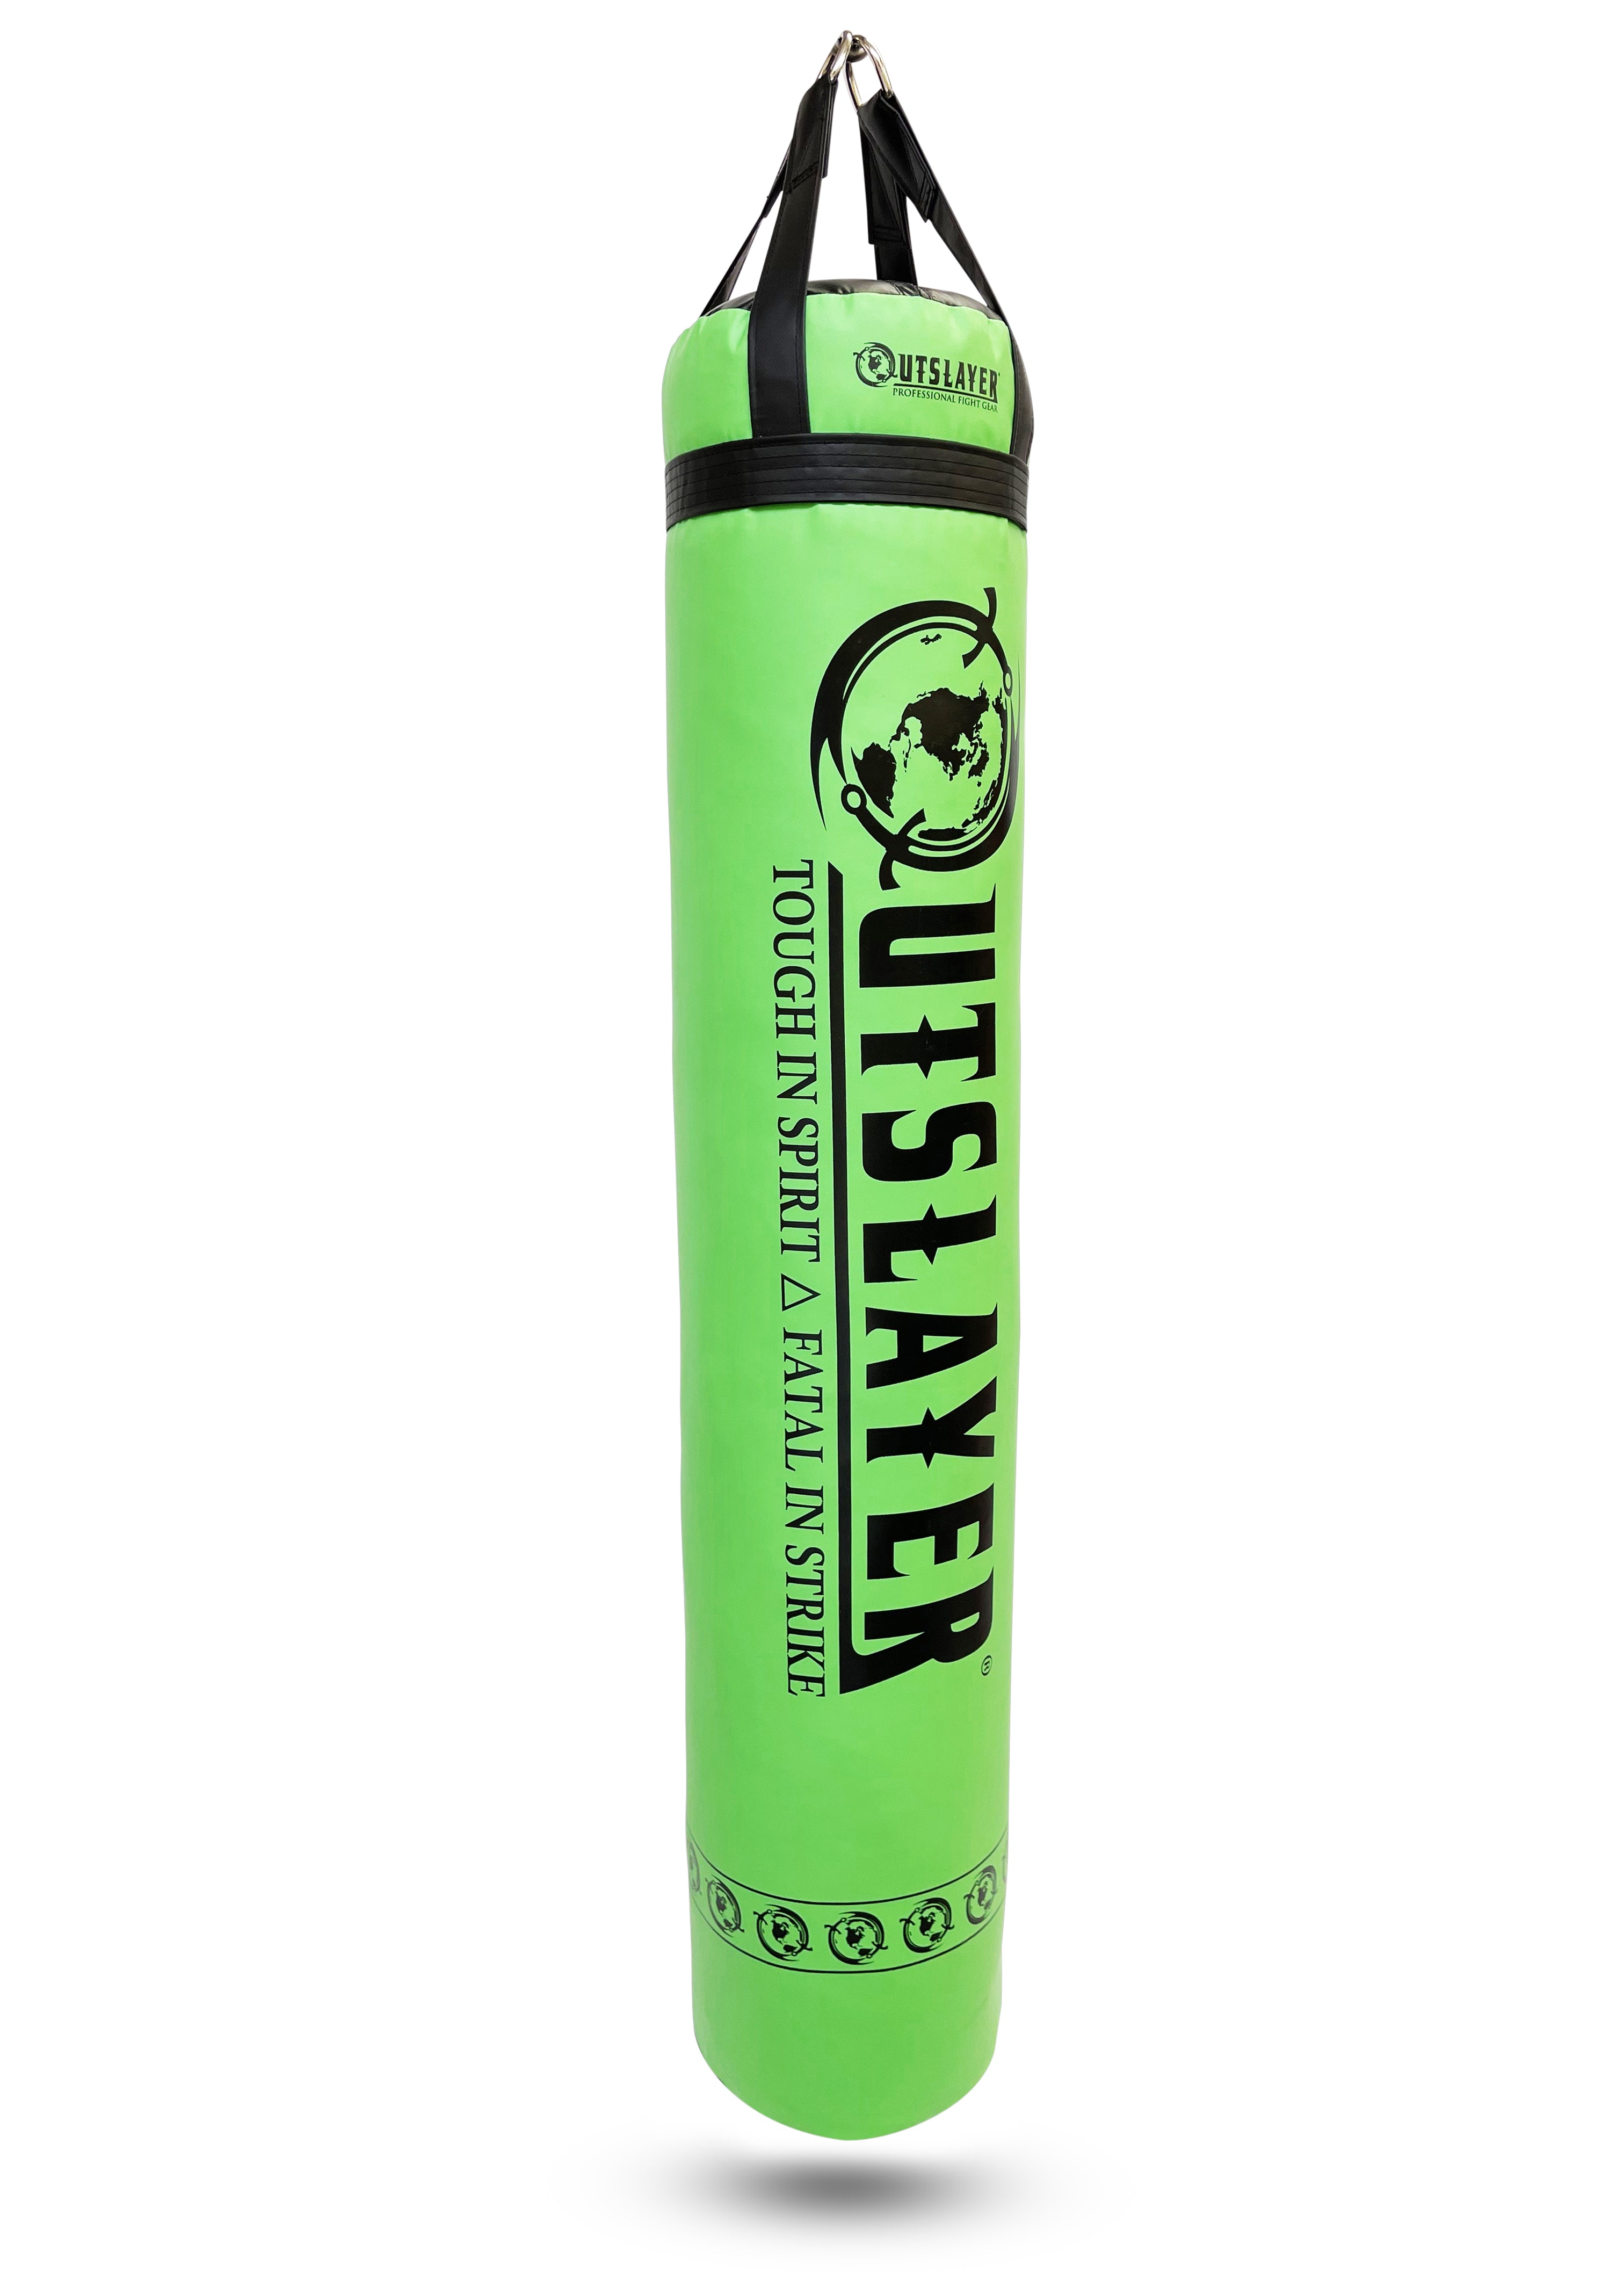 Outslayer CUSTOM PUNCHING BAGS - Choose Color/Size